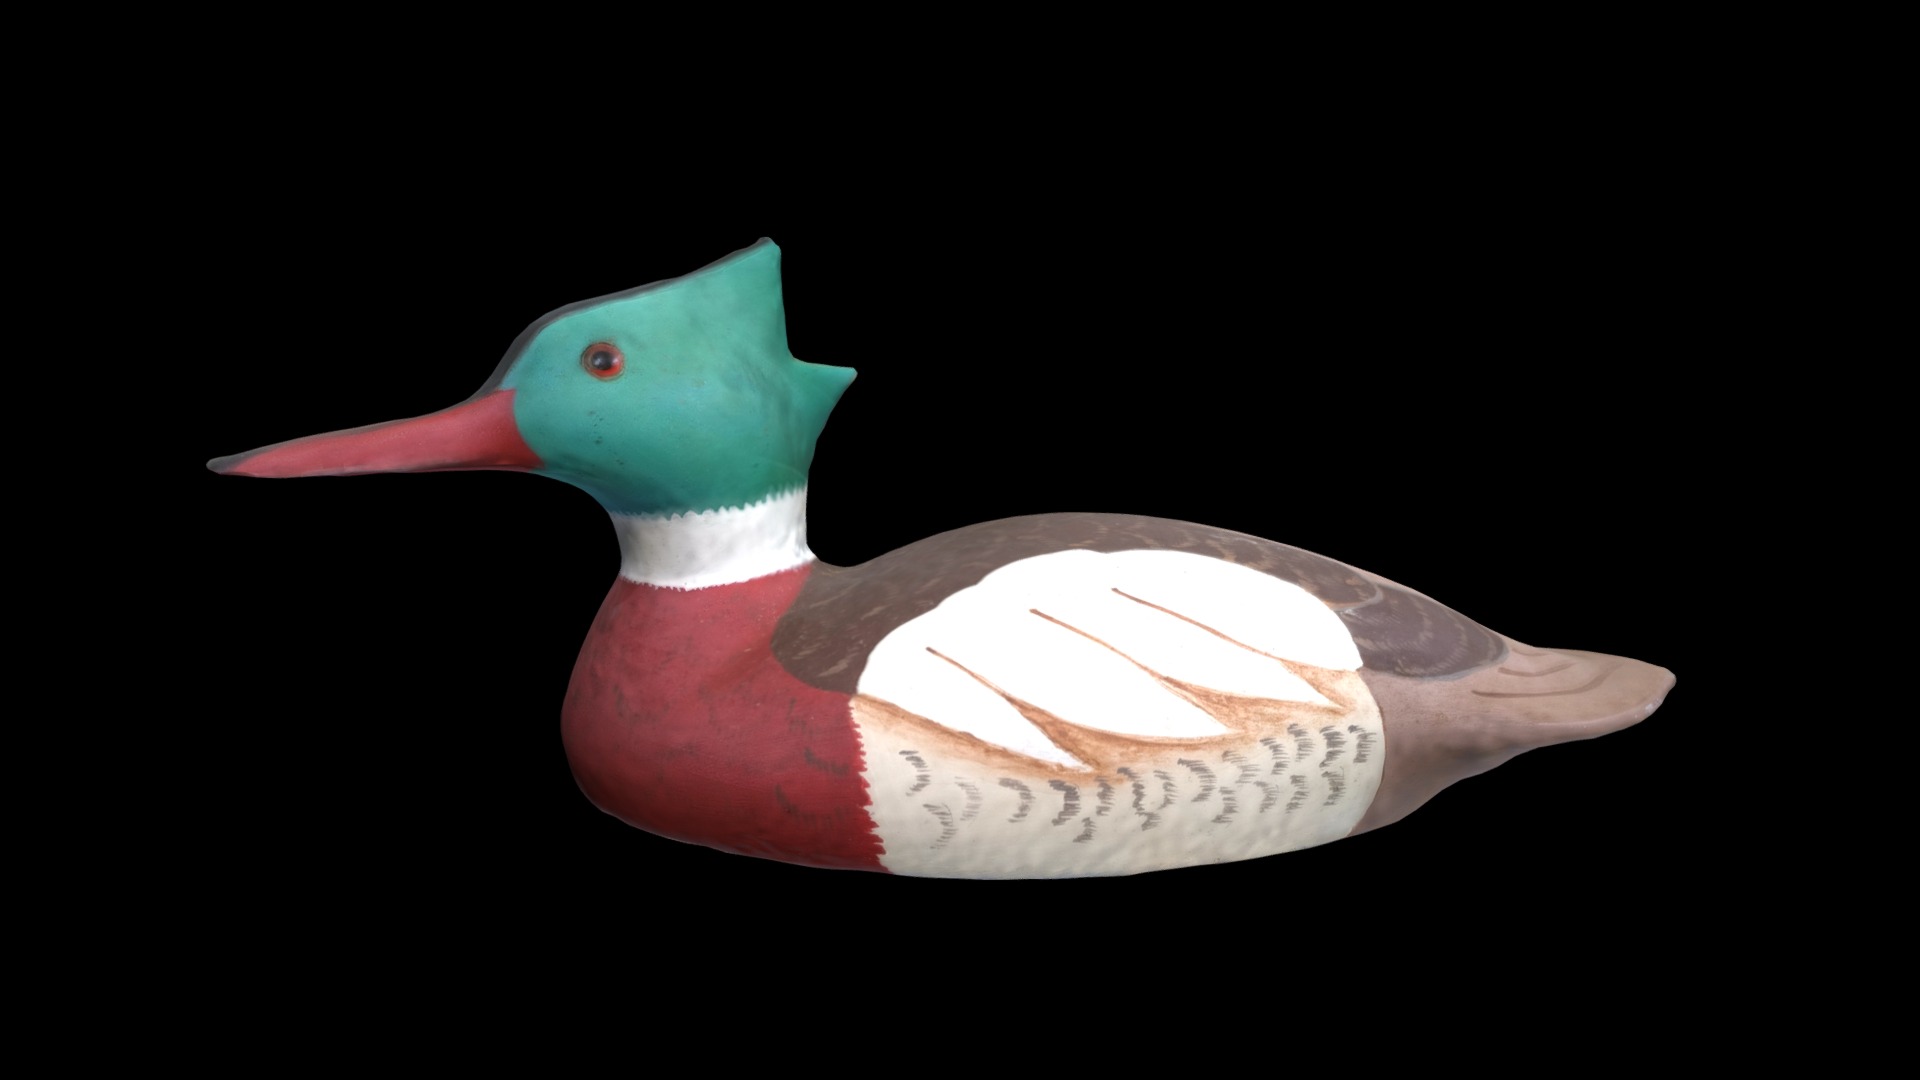 3D model Red-breasted Merganser Drake - This is a 3D model of the Red-breasted Merganser Drake. The 3D model is about a blue and white bird.